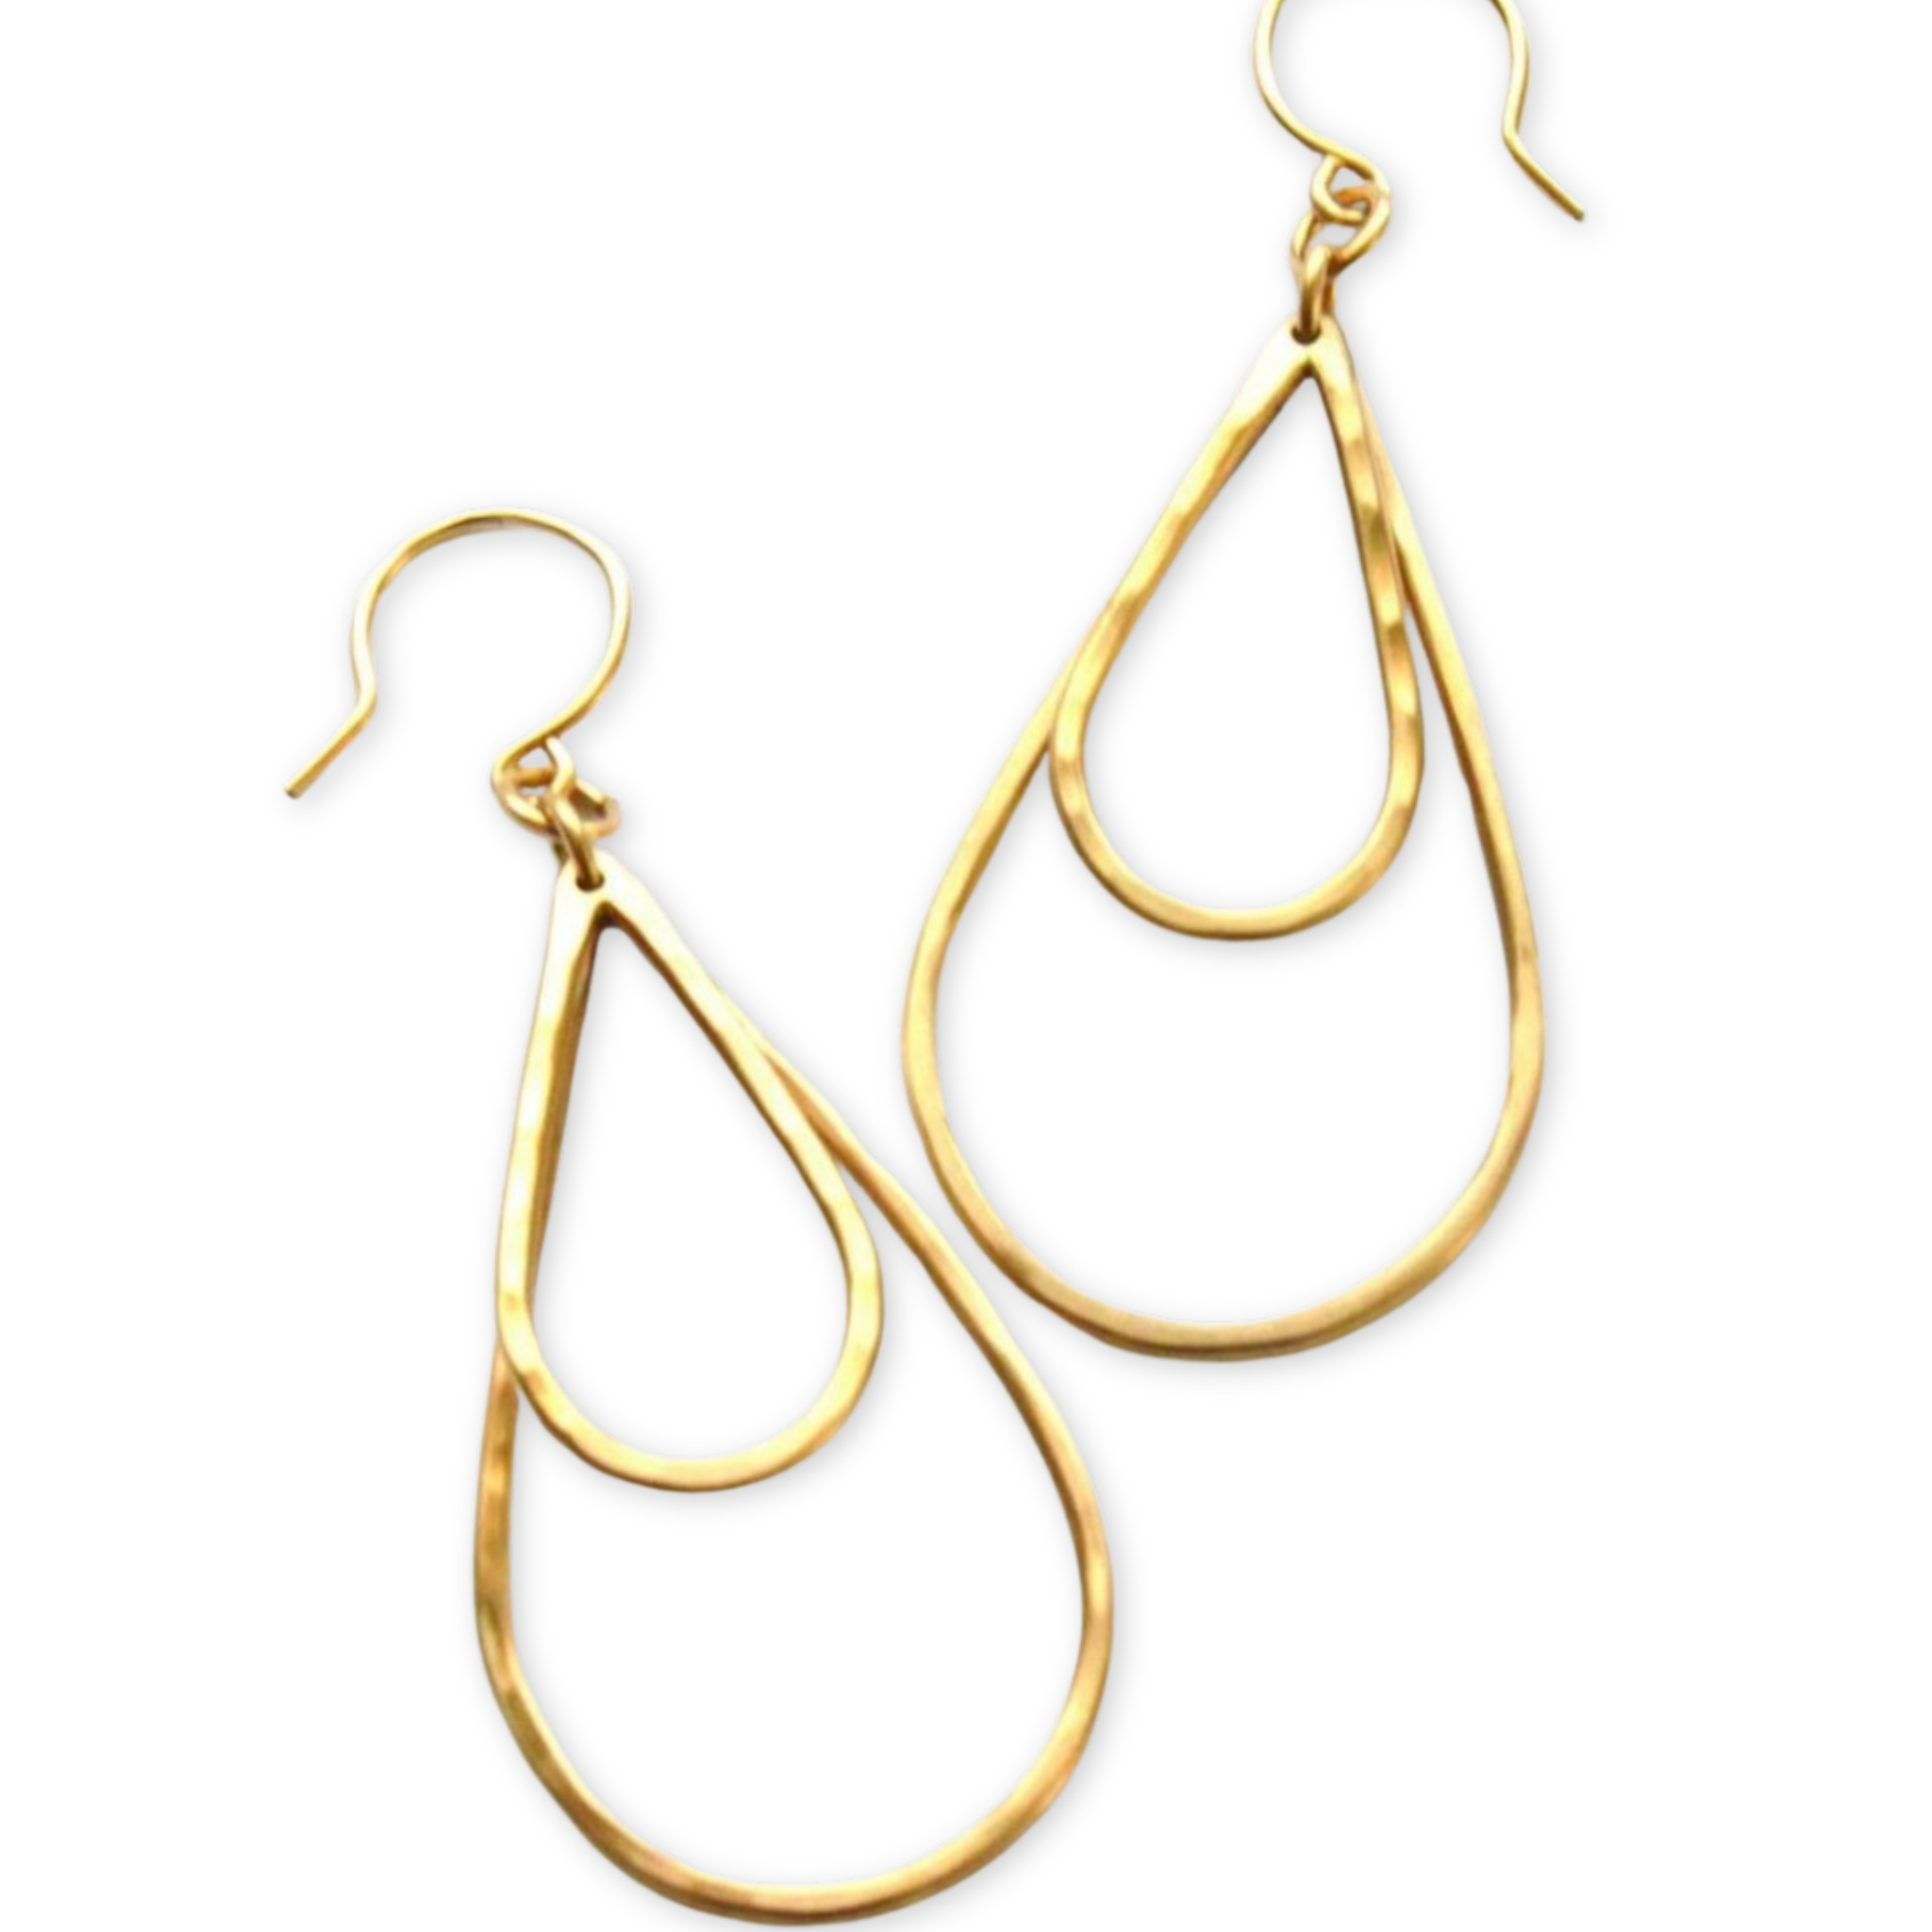 earrings featuring two hammered hanging tear drop shaped pendants 